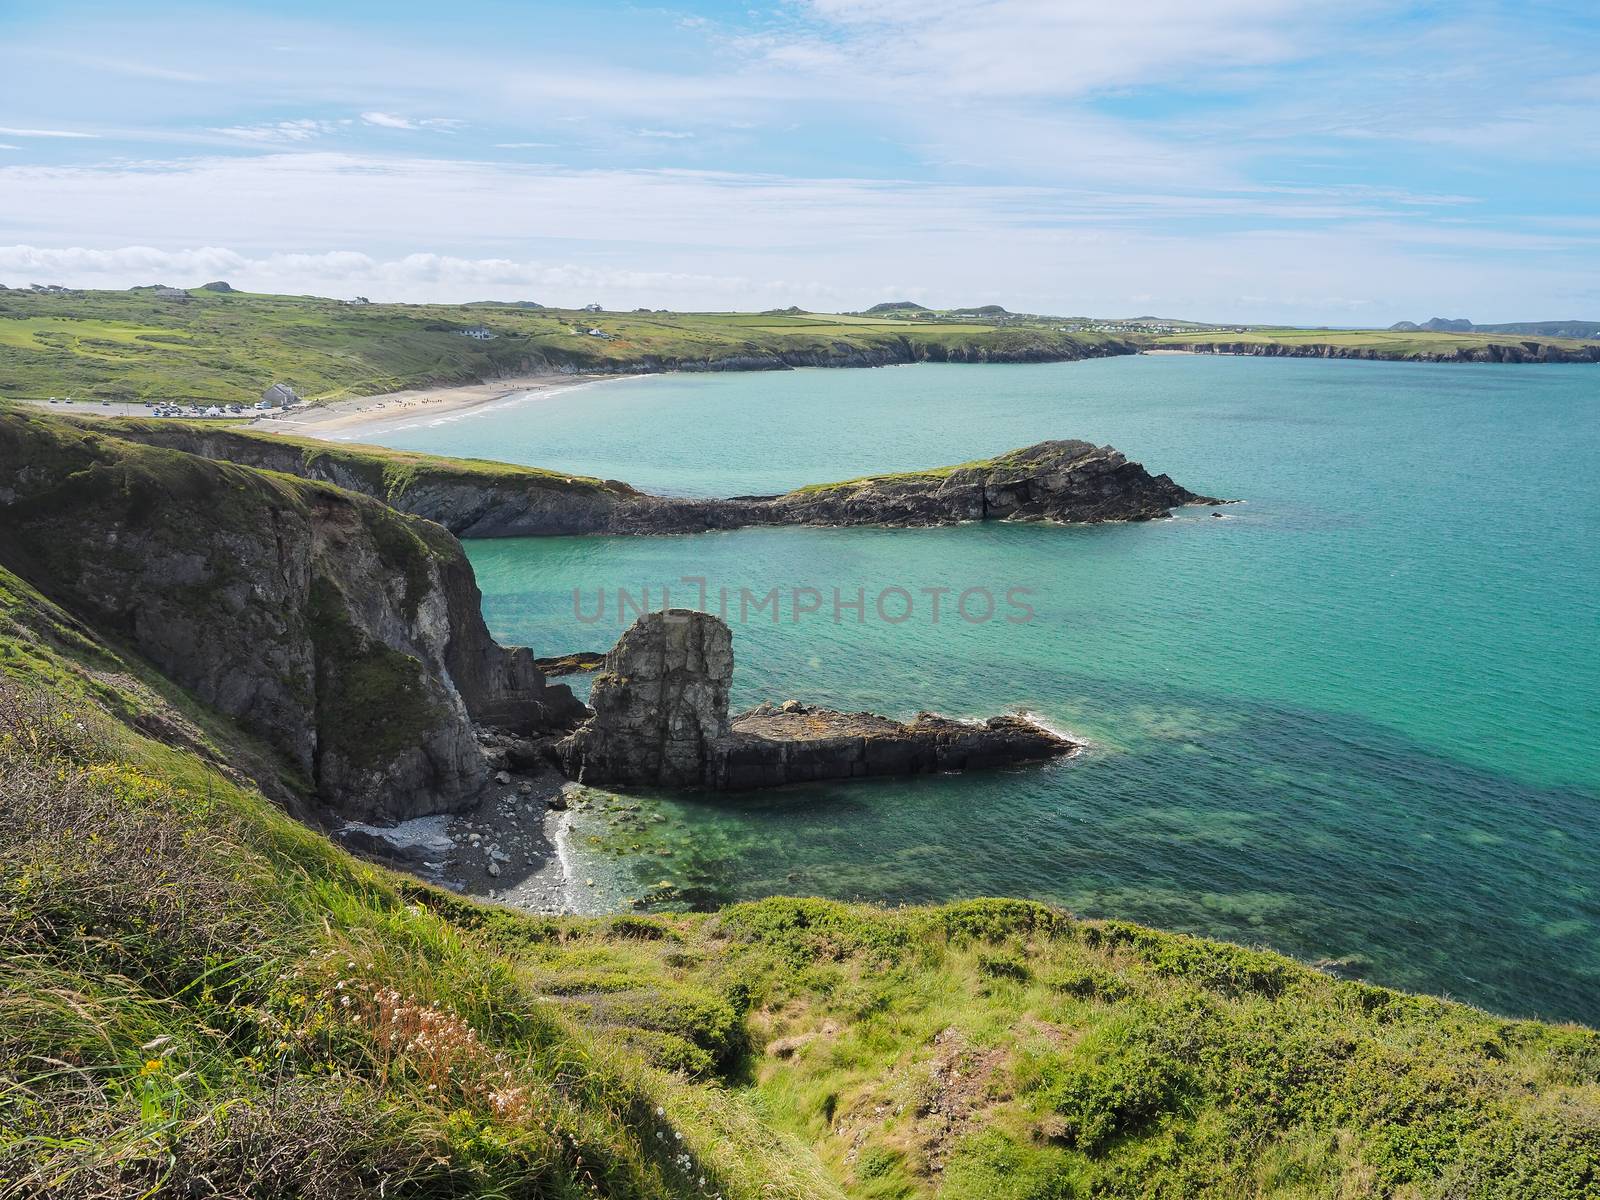 View from the coastal path around at St Davids Peninsula over the sandy beach of Whitesands Bay and dramatic cliffs and coves, Pembrokeshire Coast National Park, Wales, UK